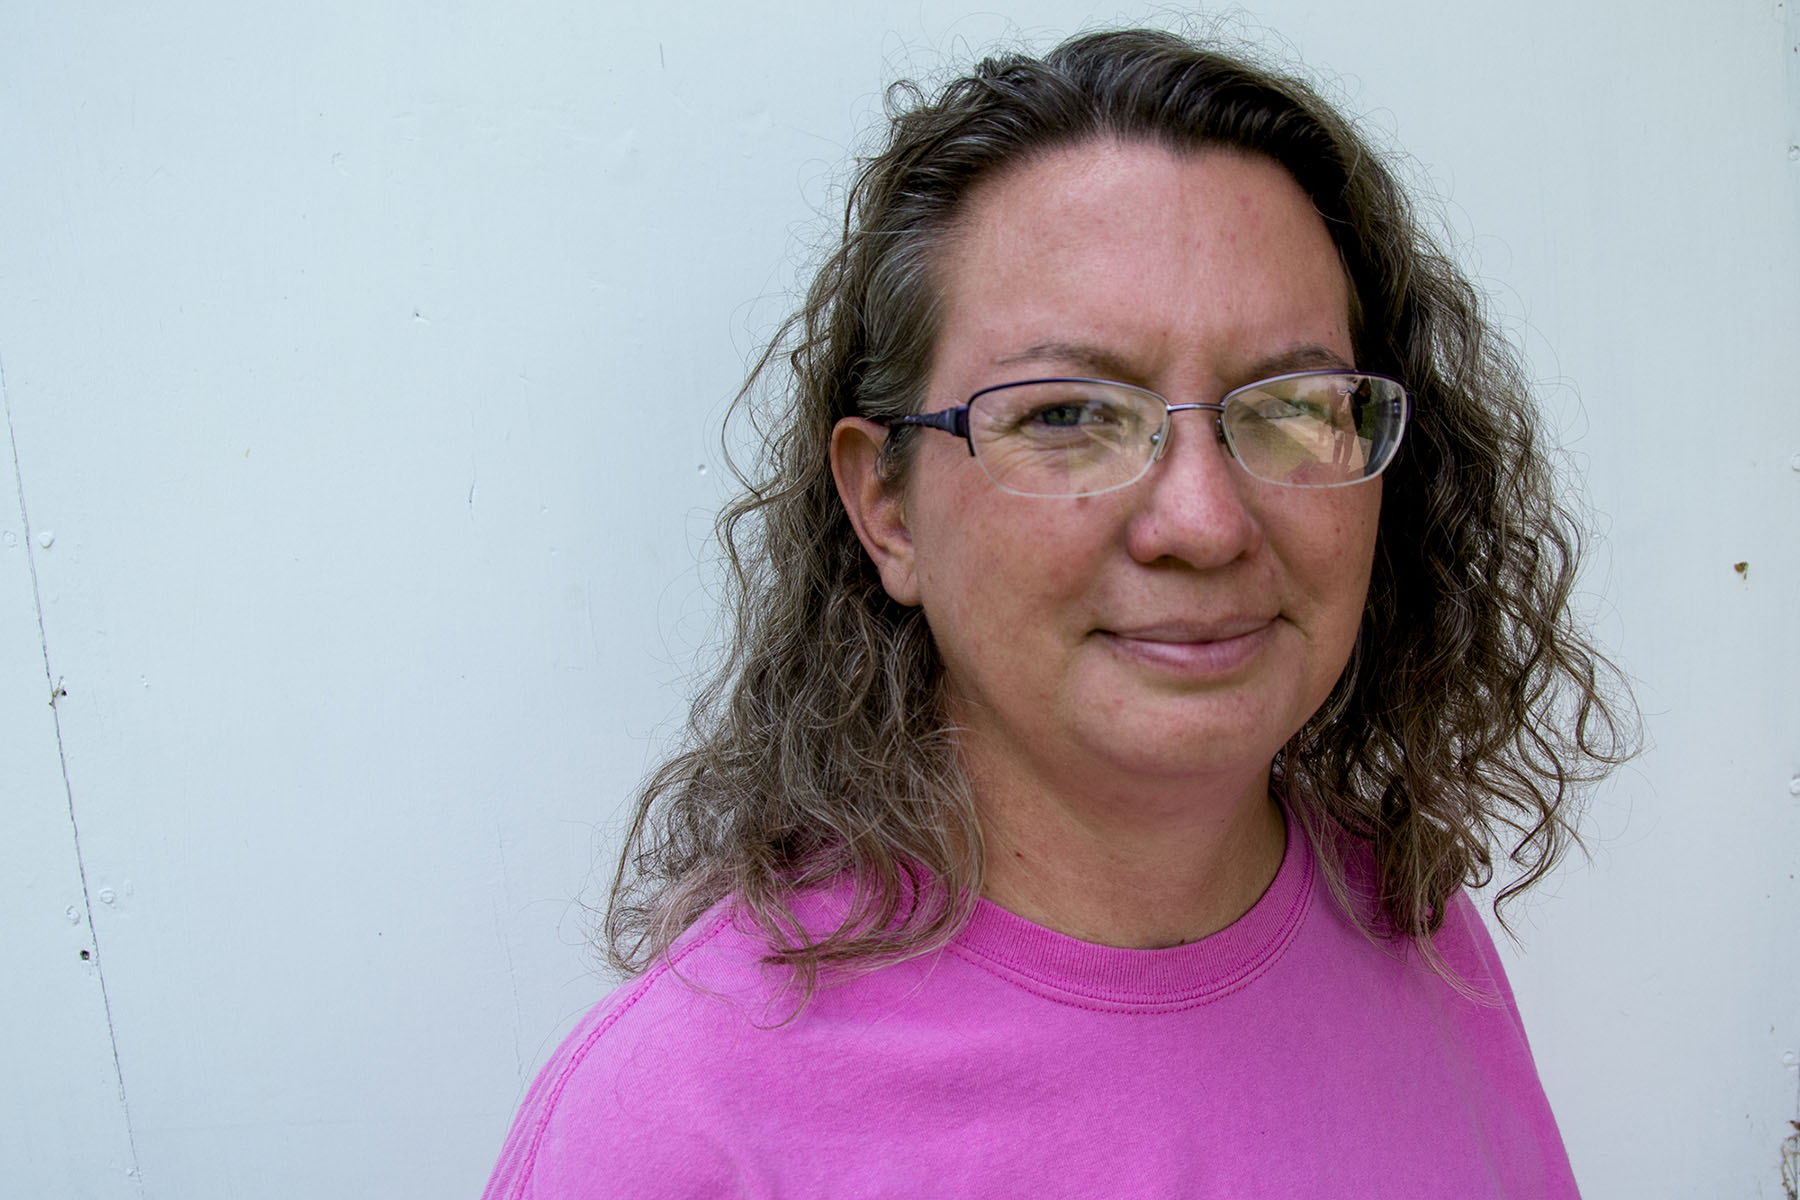 Carri New is a Wichita volunteer who used to work for Bernie Sanders' presidential campaign and conducts voter registration drives. She vehemently opposes the Secure and Fair Elections Act. (Photo by Andrew Clark, audio by Sarah Pitts/News21)